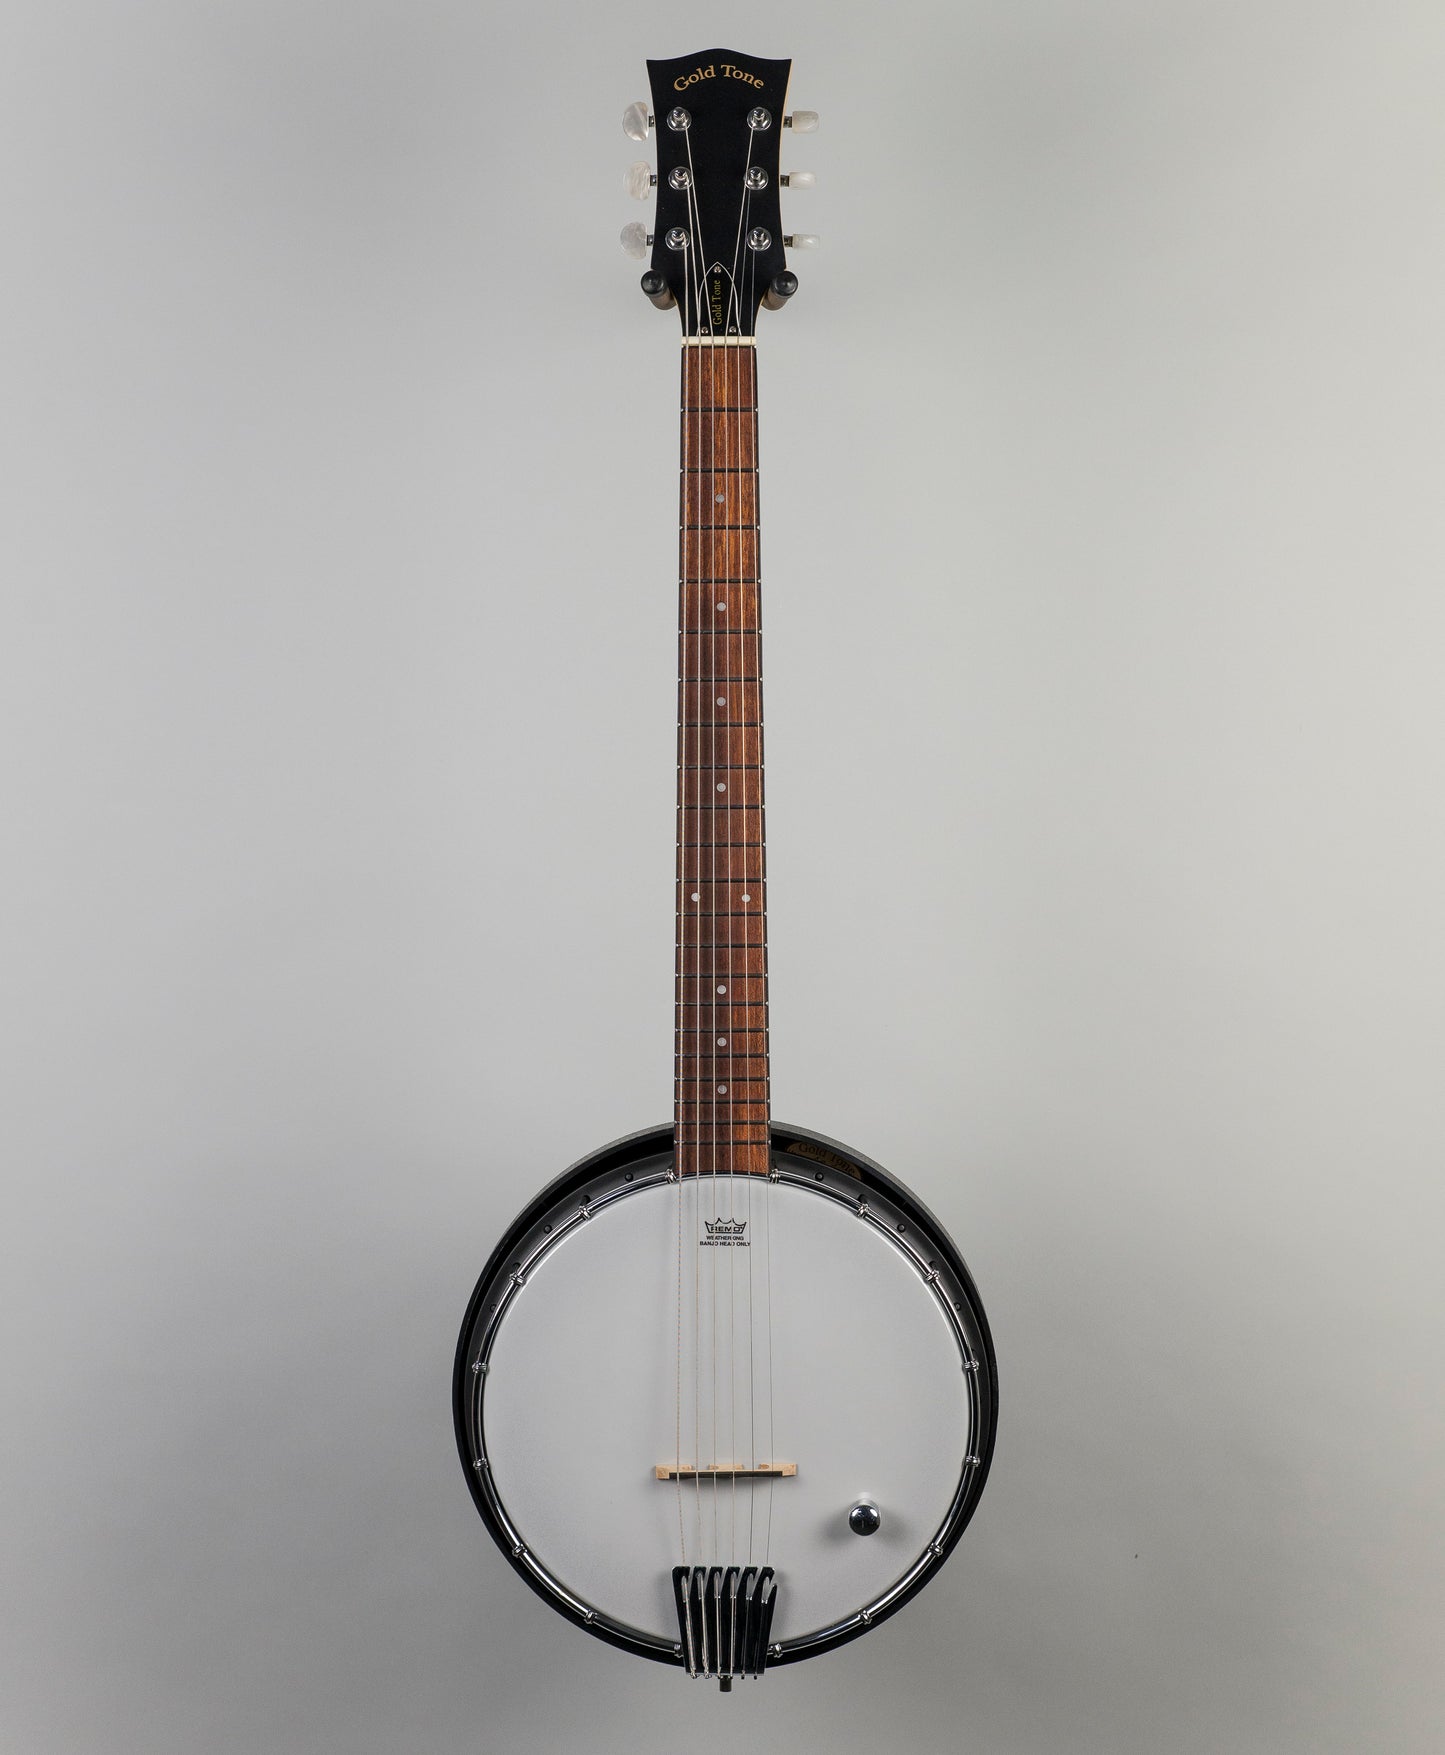 Gold Tone AC-6+ Acoustic Composite Banjo Guitar with Pickup